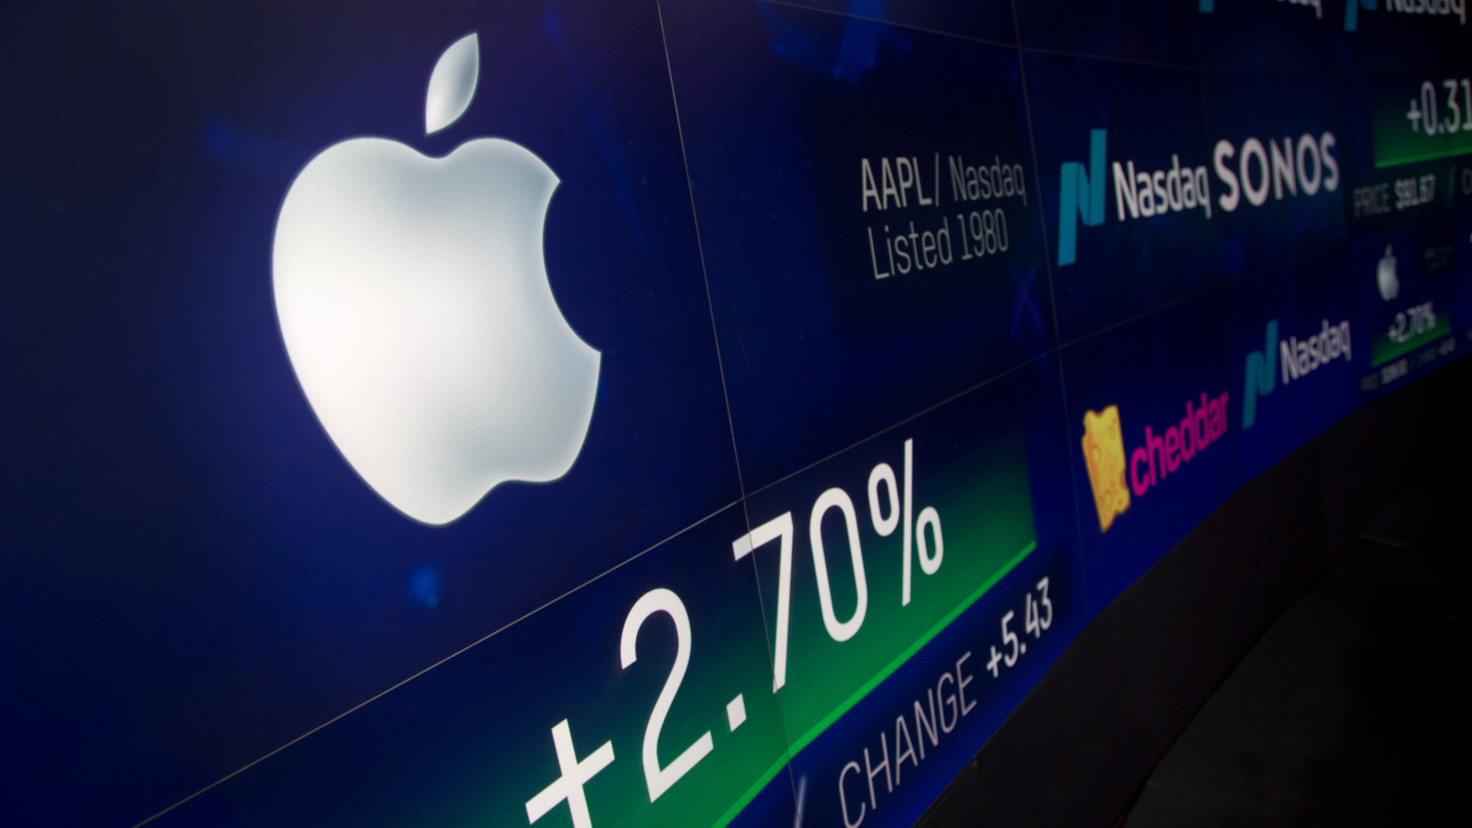 Analysts raise Apple price targets but warn against inflated expectations